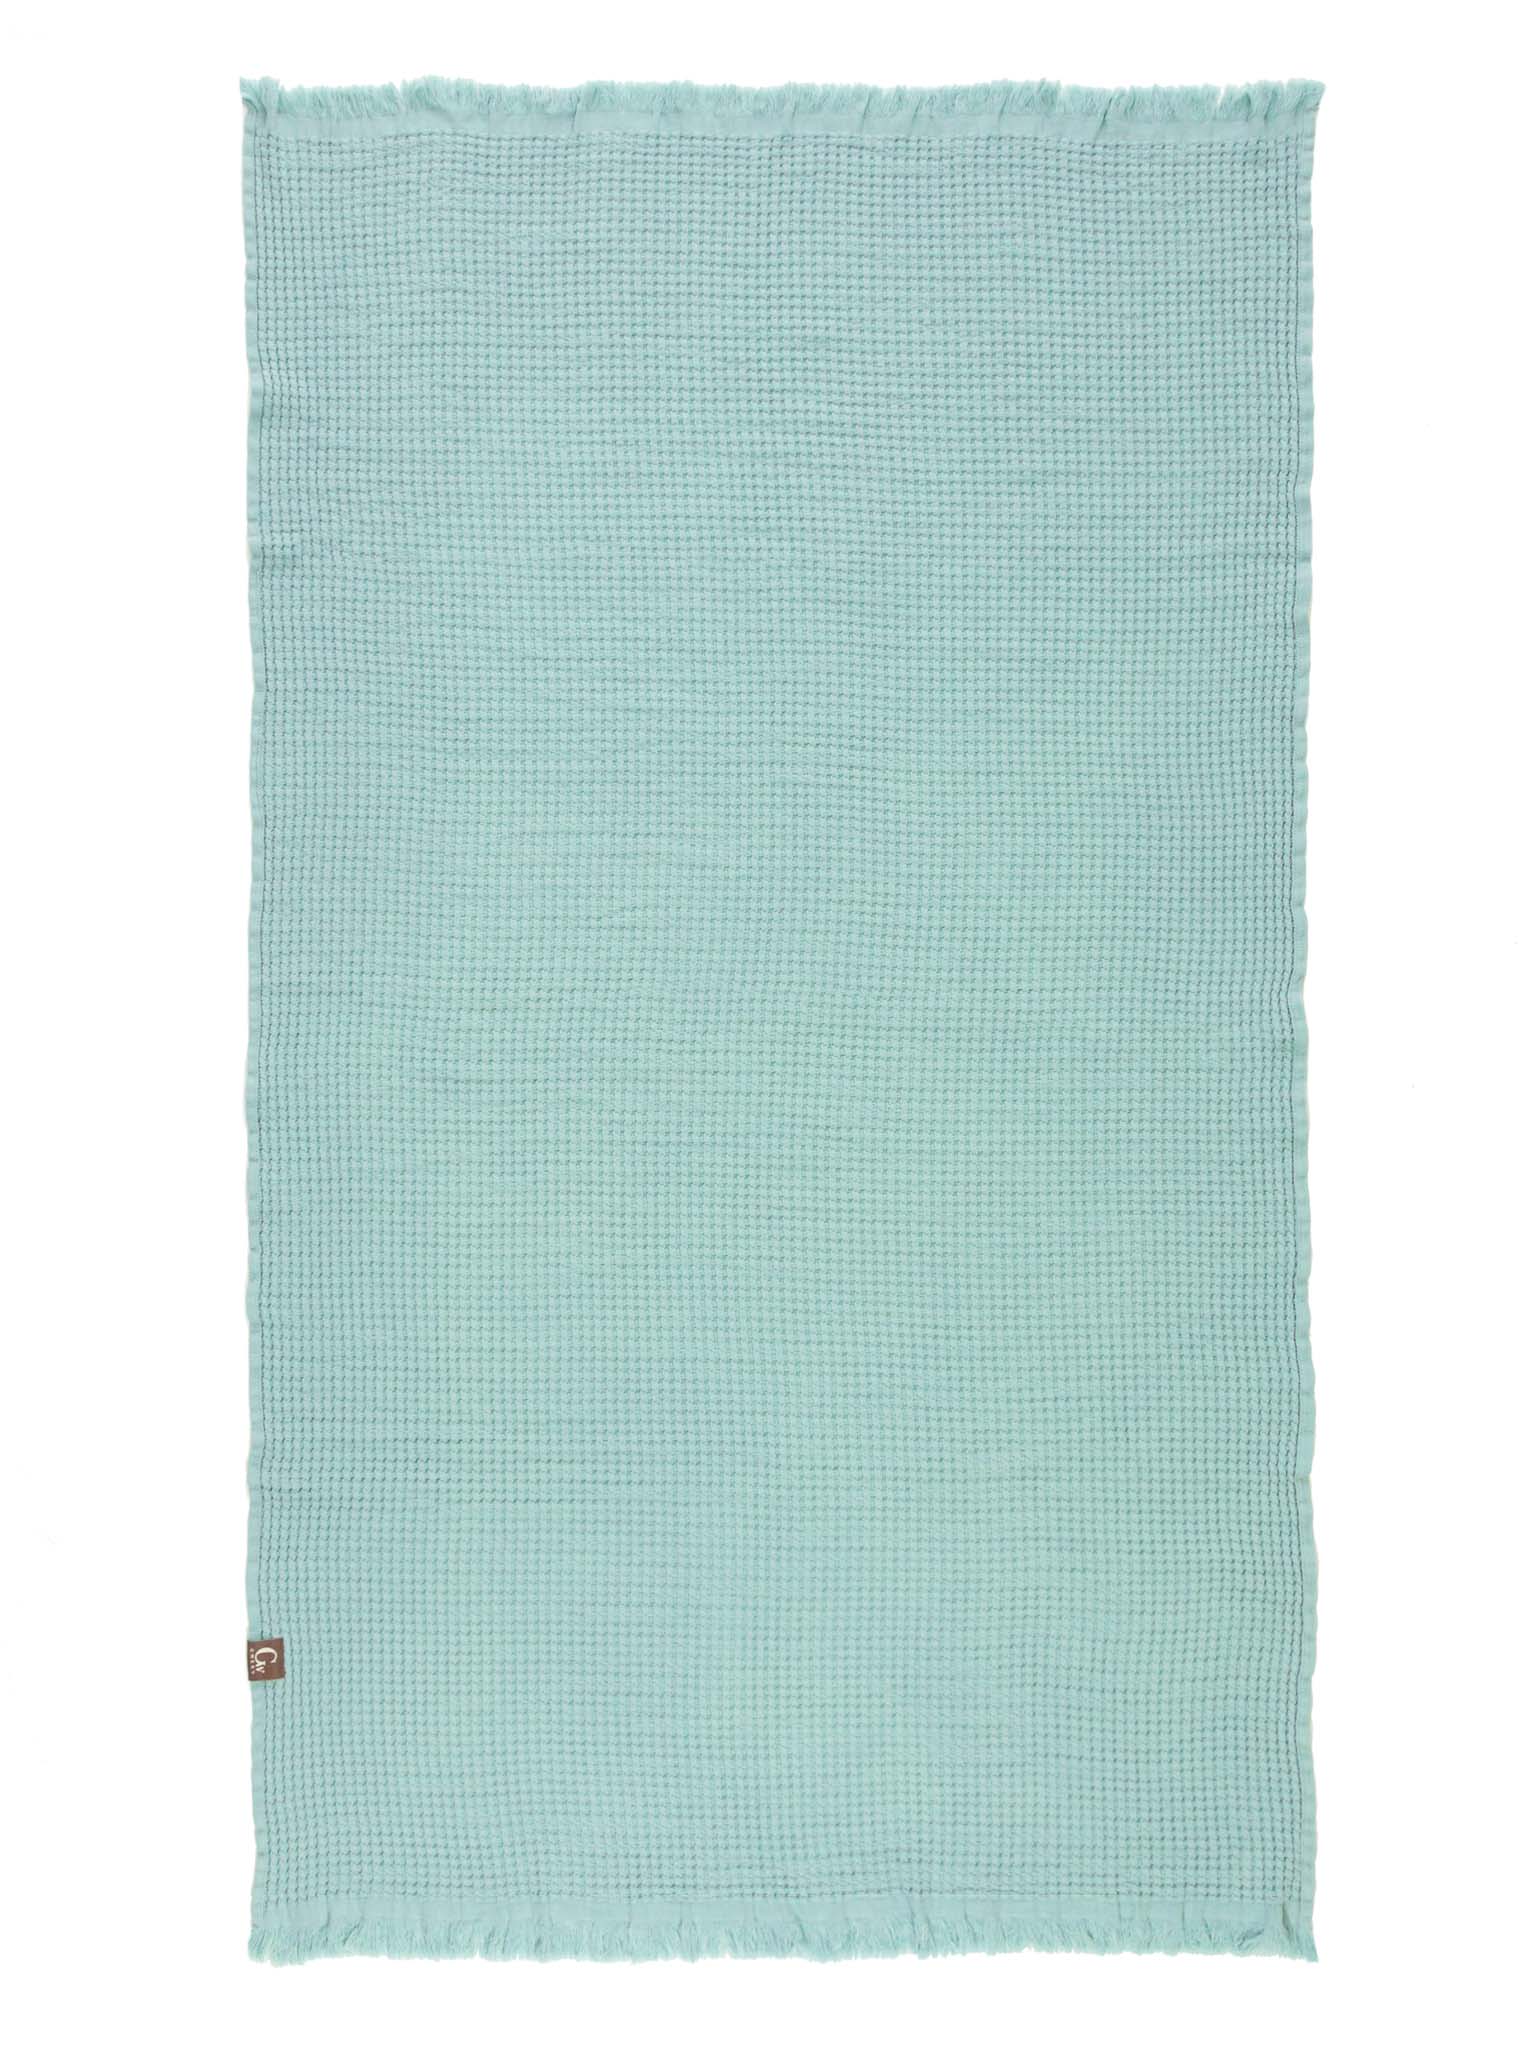 Cyan double sided honeycomb beach towel open up